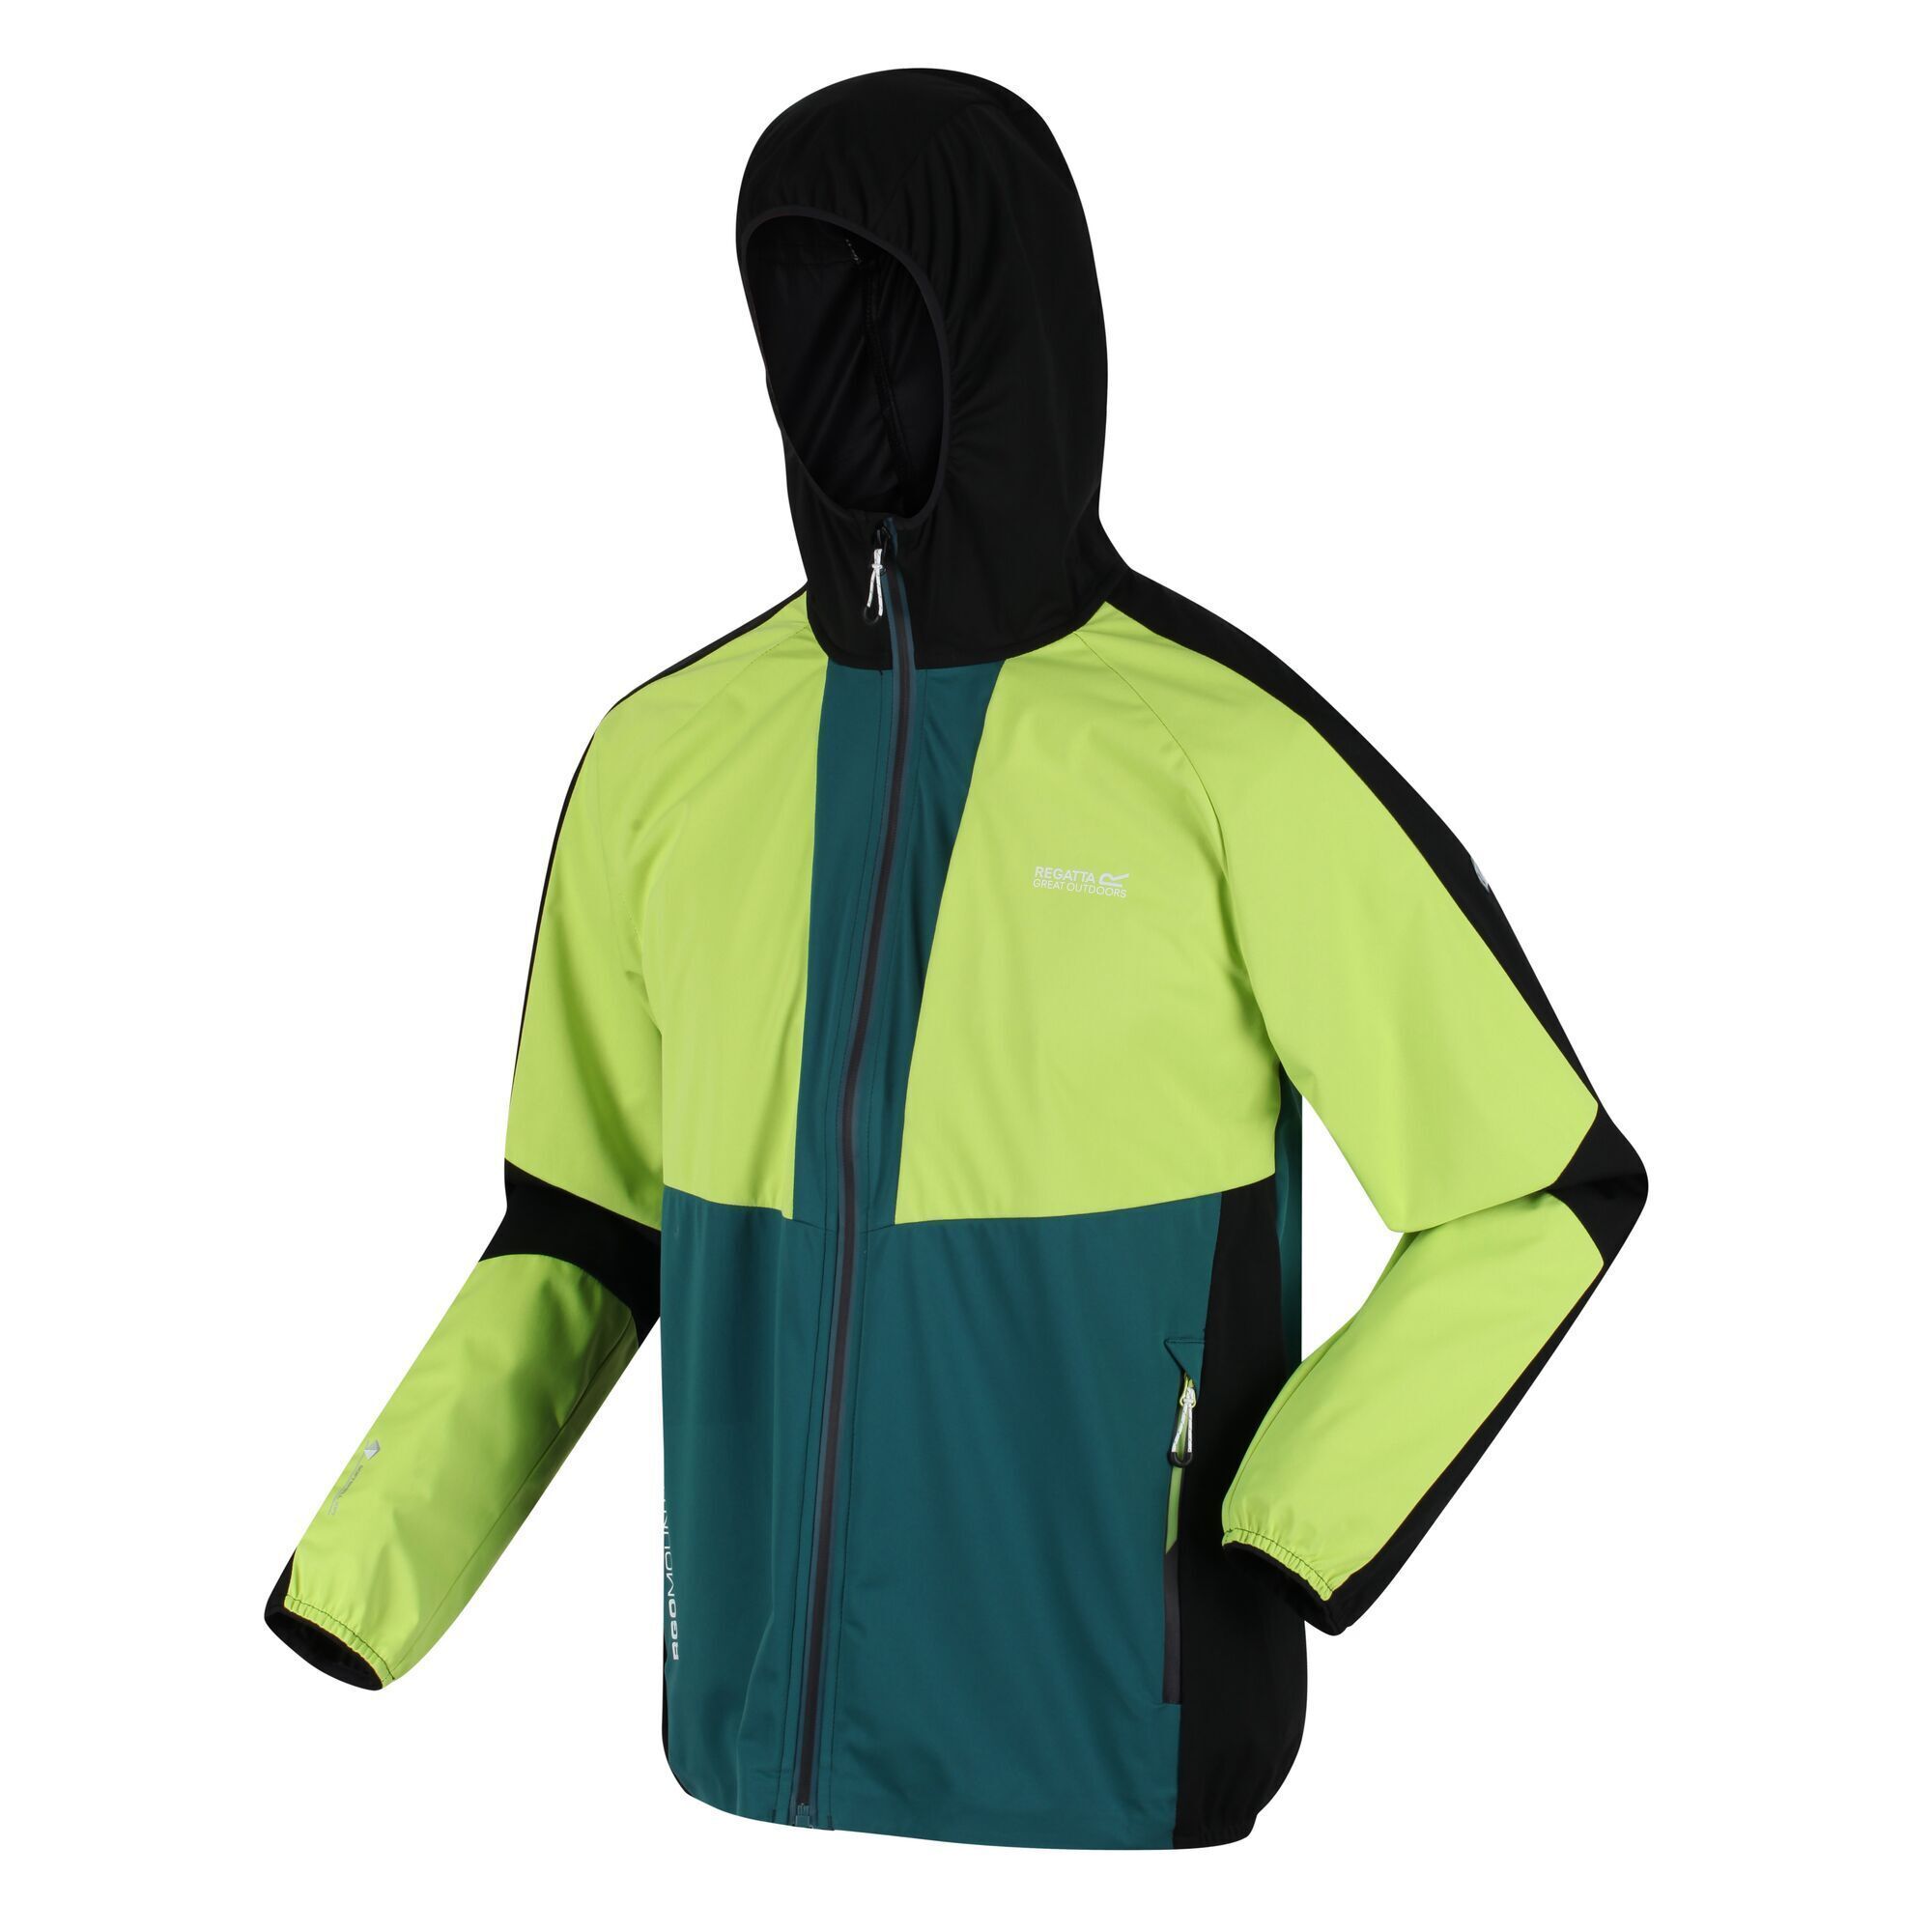 Material: 100% Polyester. Fabric: Softshell, Stretch. Design: Colour Block, Logo, Text. Fit: Streamlined. Fabric Technology: Breathable, DWR Finish, Lightweight, Moisture Control, Waterproof, Wind Resistant, XPT. Fabric Zip Pull, Inner Zip Guard. Neckline: Hooded. Sleeve-Type: Long-Sleeved. Cuff: Stretch Binding. Hood Features: Grown On Hood, Stretch Binding. Pockets: 2 Zip Pockets, 1 Chest Pocket, Zip. Fastening: Full Zip. 10000g/m²/24hrs. Hem: Stretch Binding.